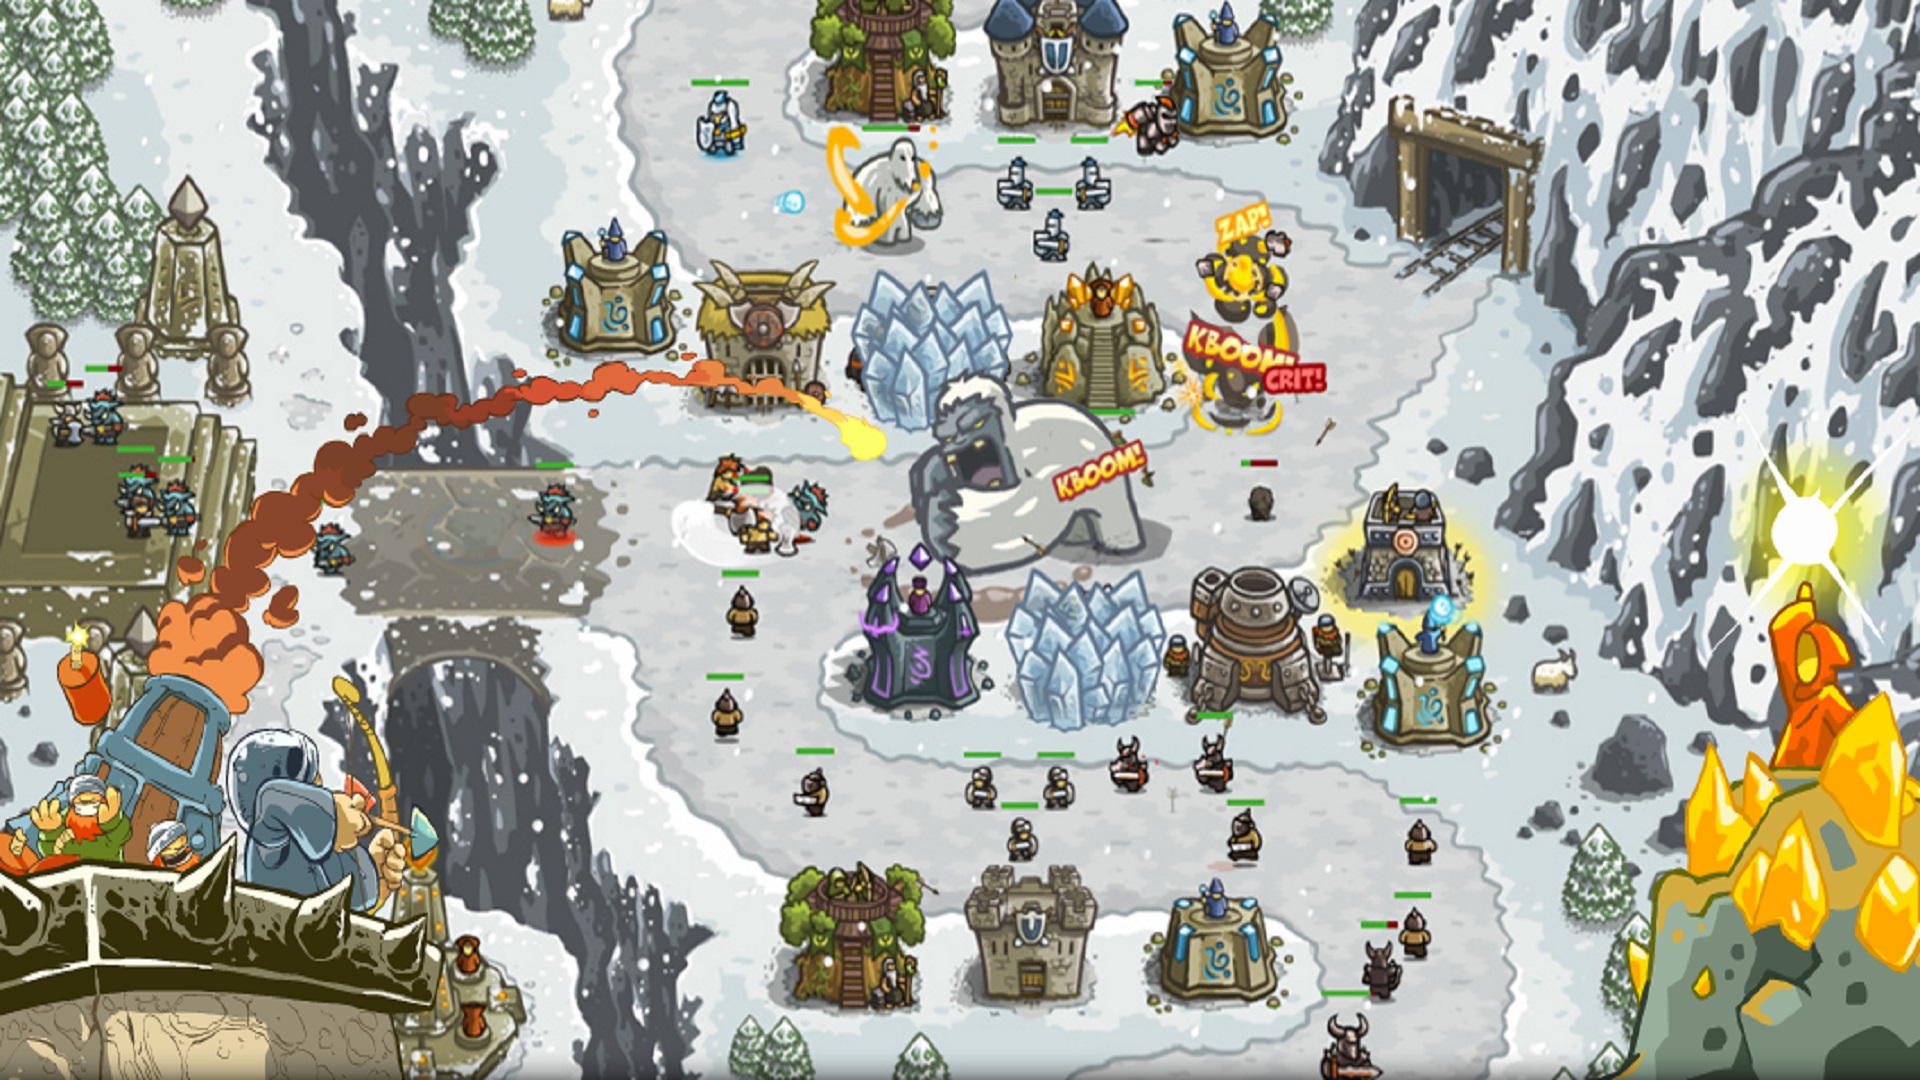 Best mobile games: Kingdom Rush. Image shows a battle taking place in the snow.